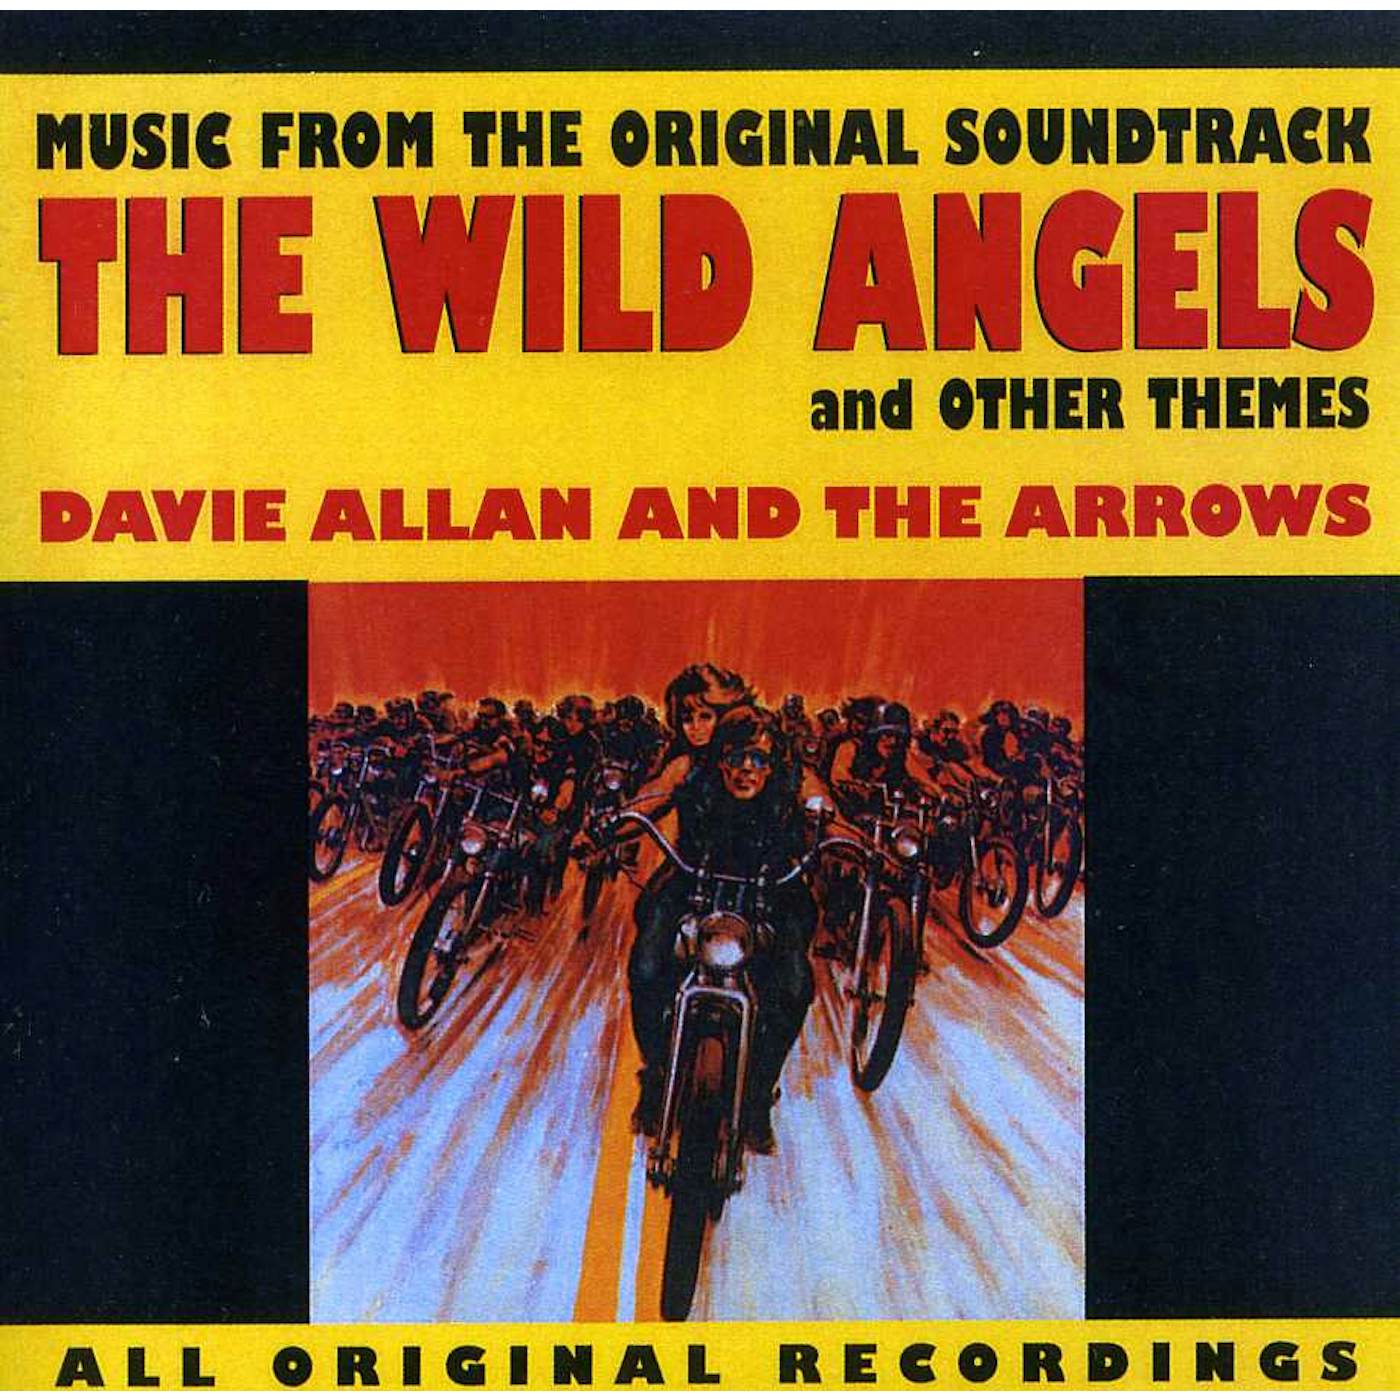 Davie Allan & The Arrows WILD ANGELS & OTHER THEMES CD